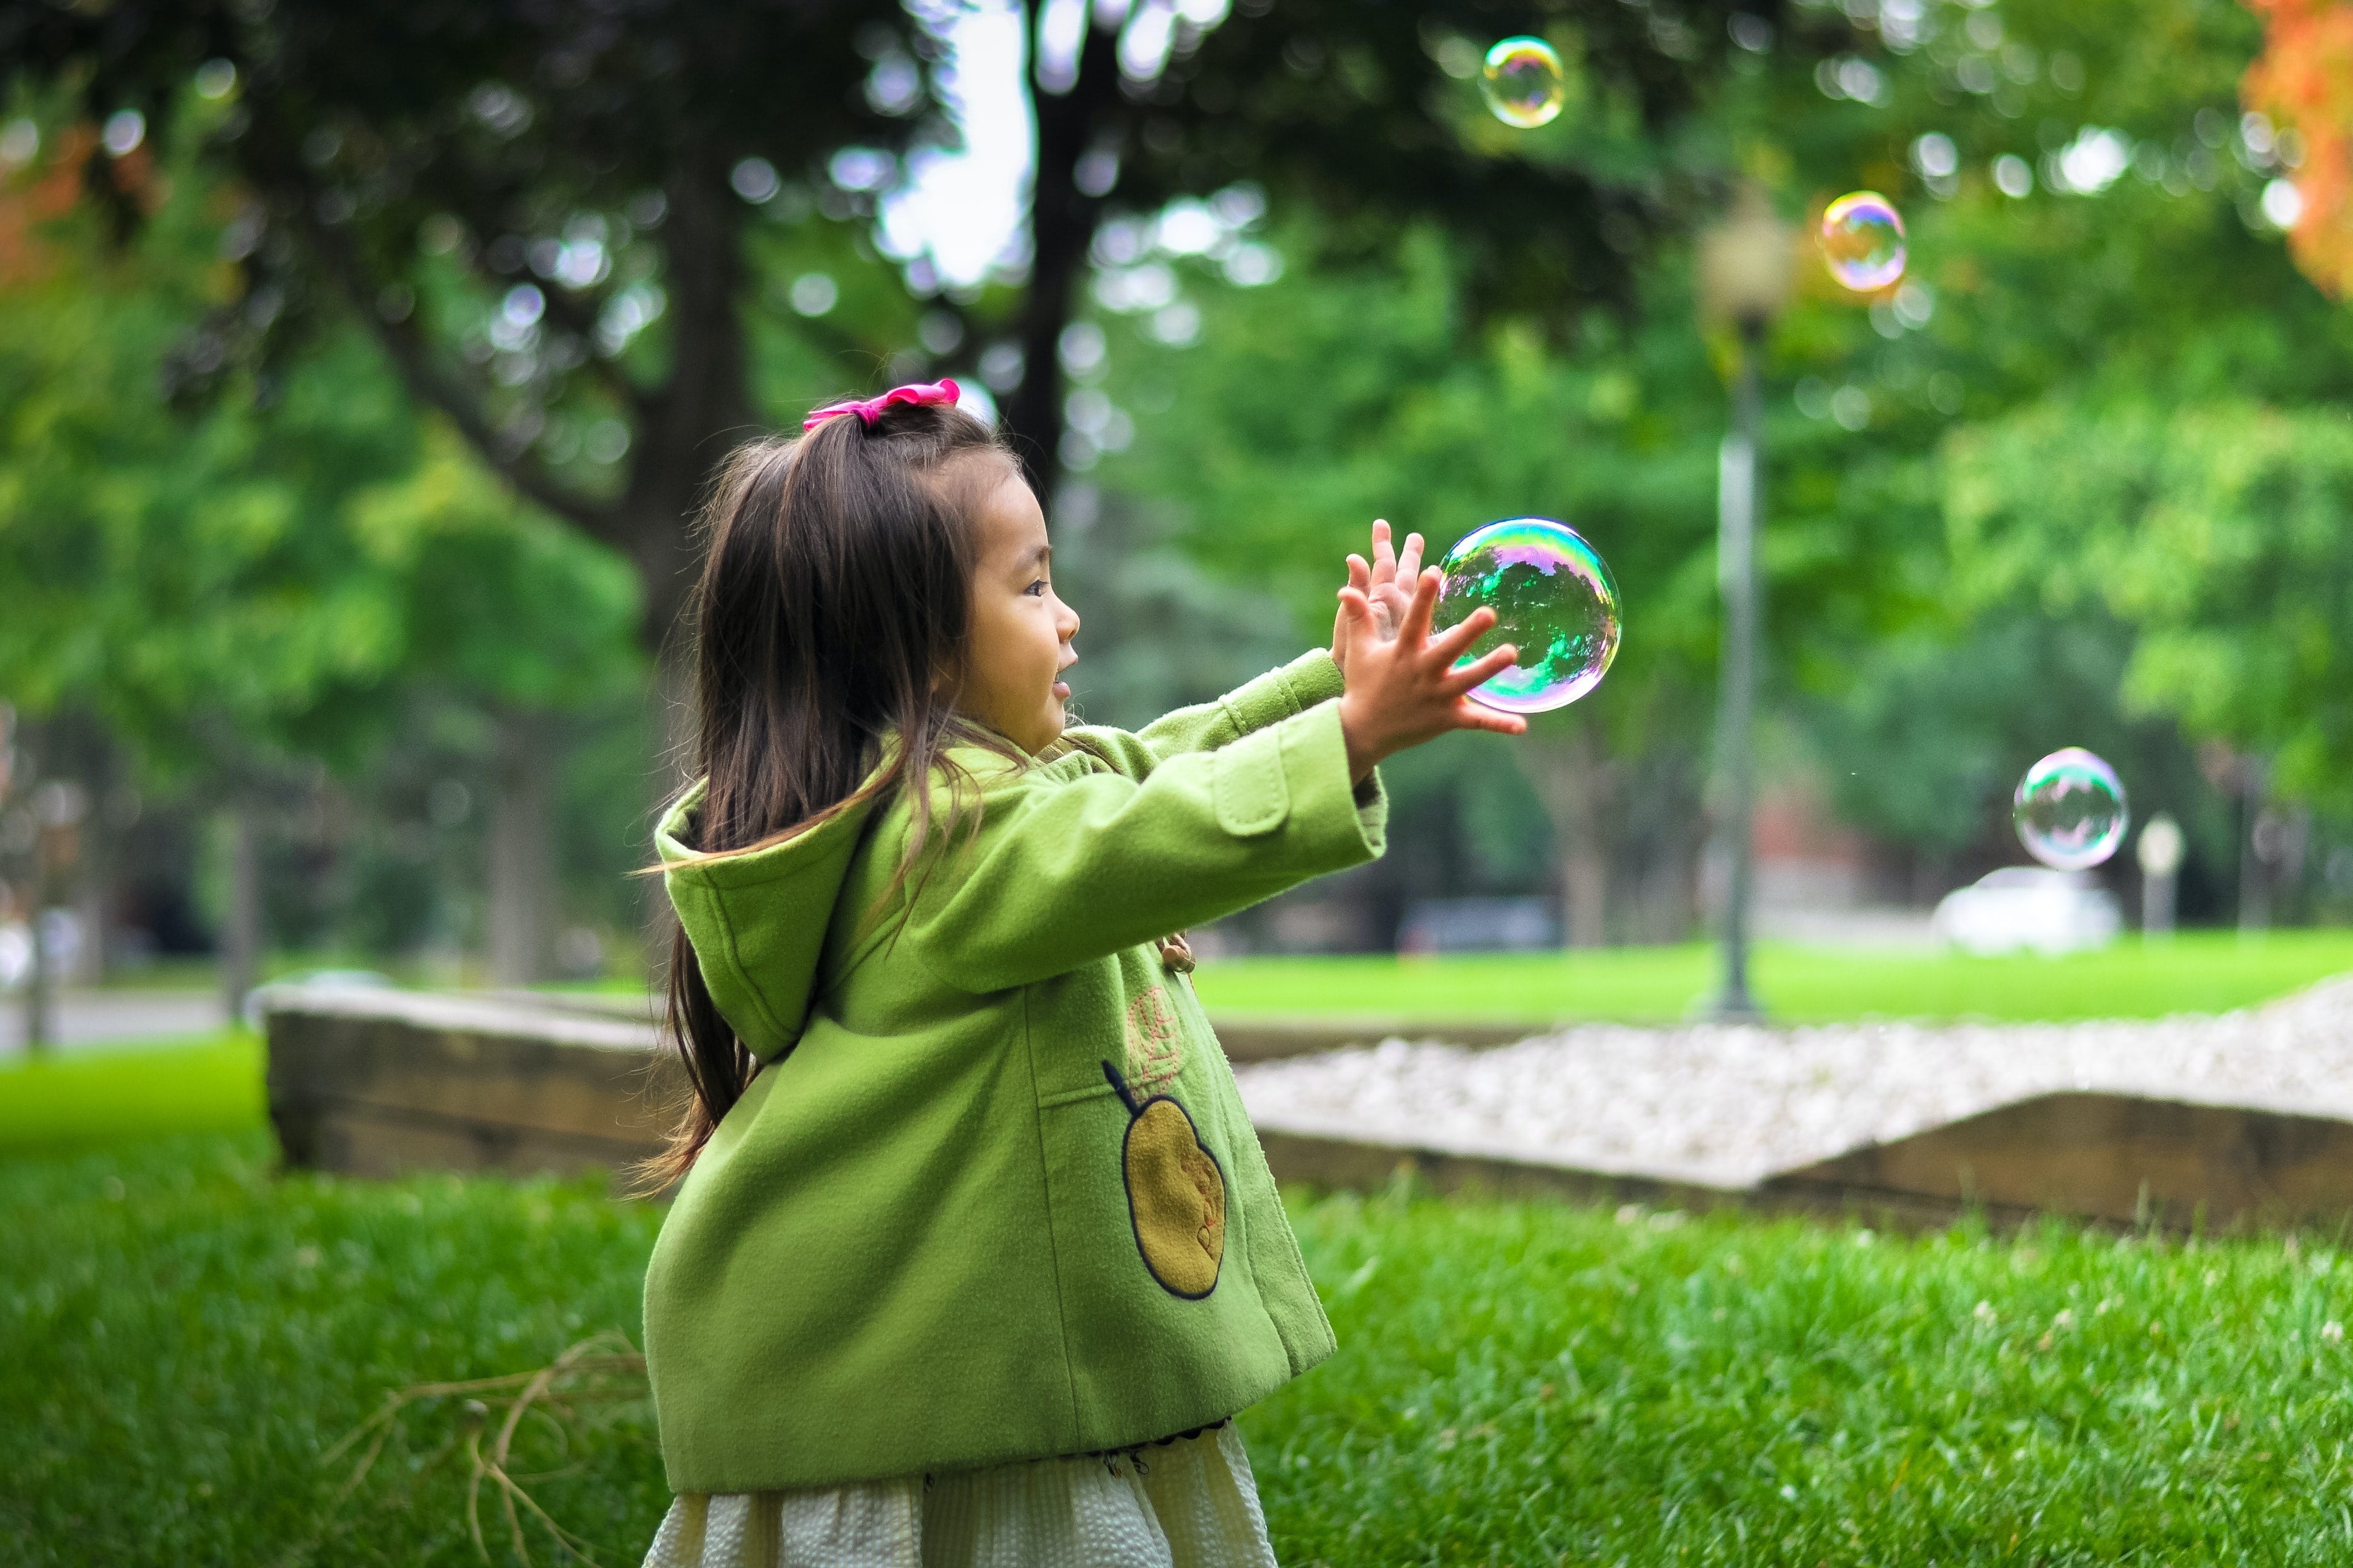 A little girl in a park-like setting reaches for bubbles.